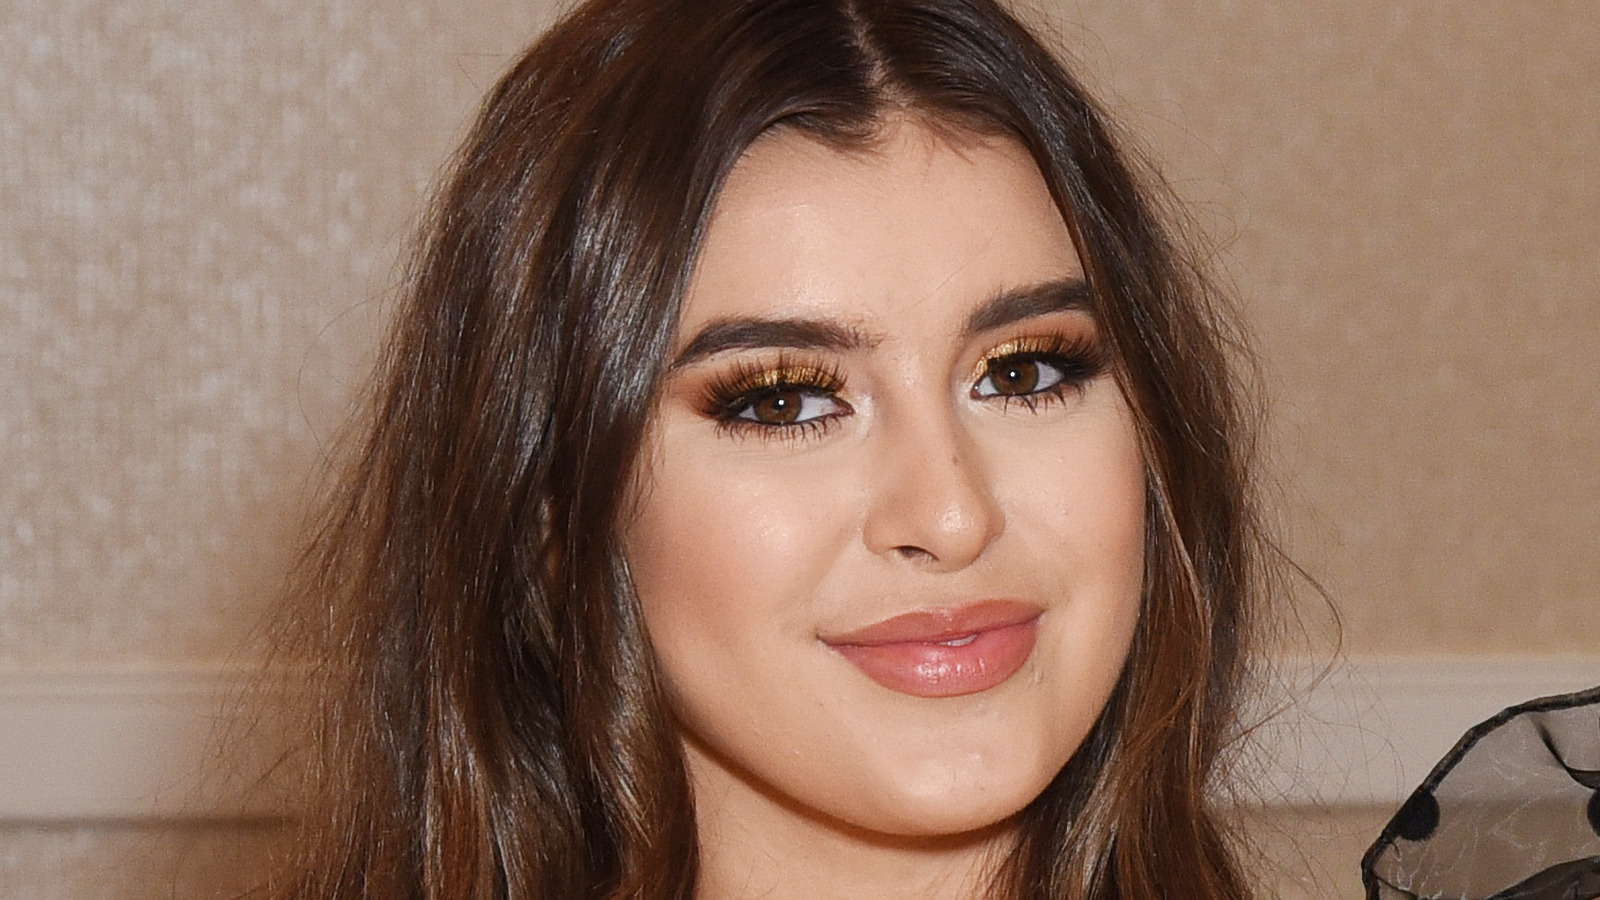 What Is Kalani Hilliker From Dance Moms Doing Today?